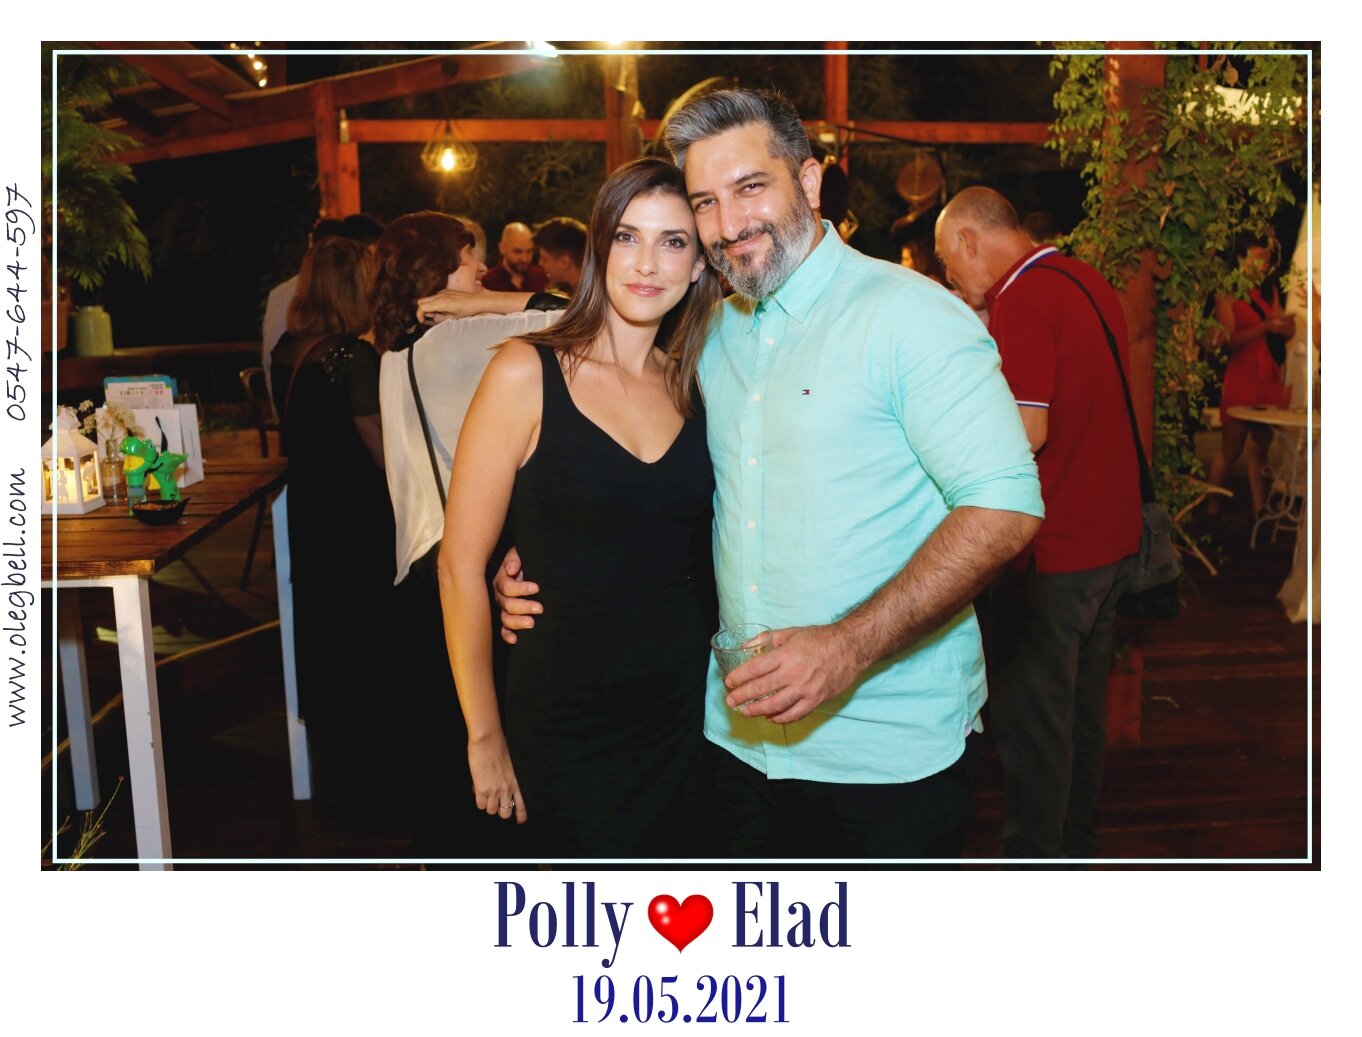 POLLY_AND_ELAD_WD_MG_SITE_014.JPG